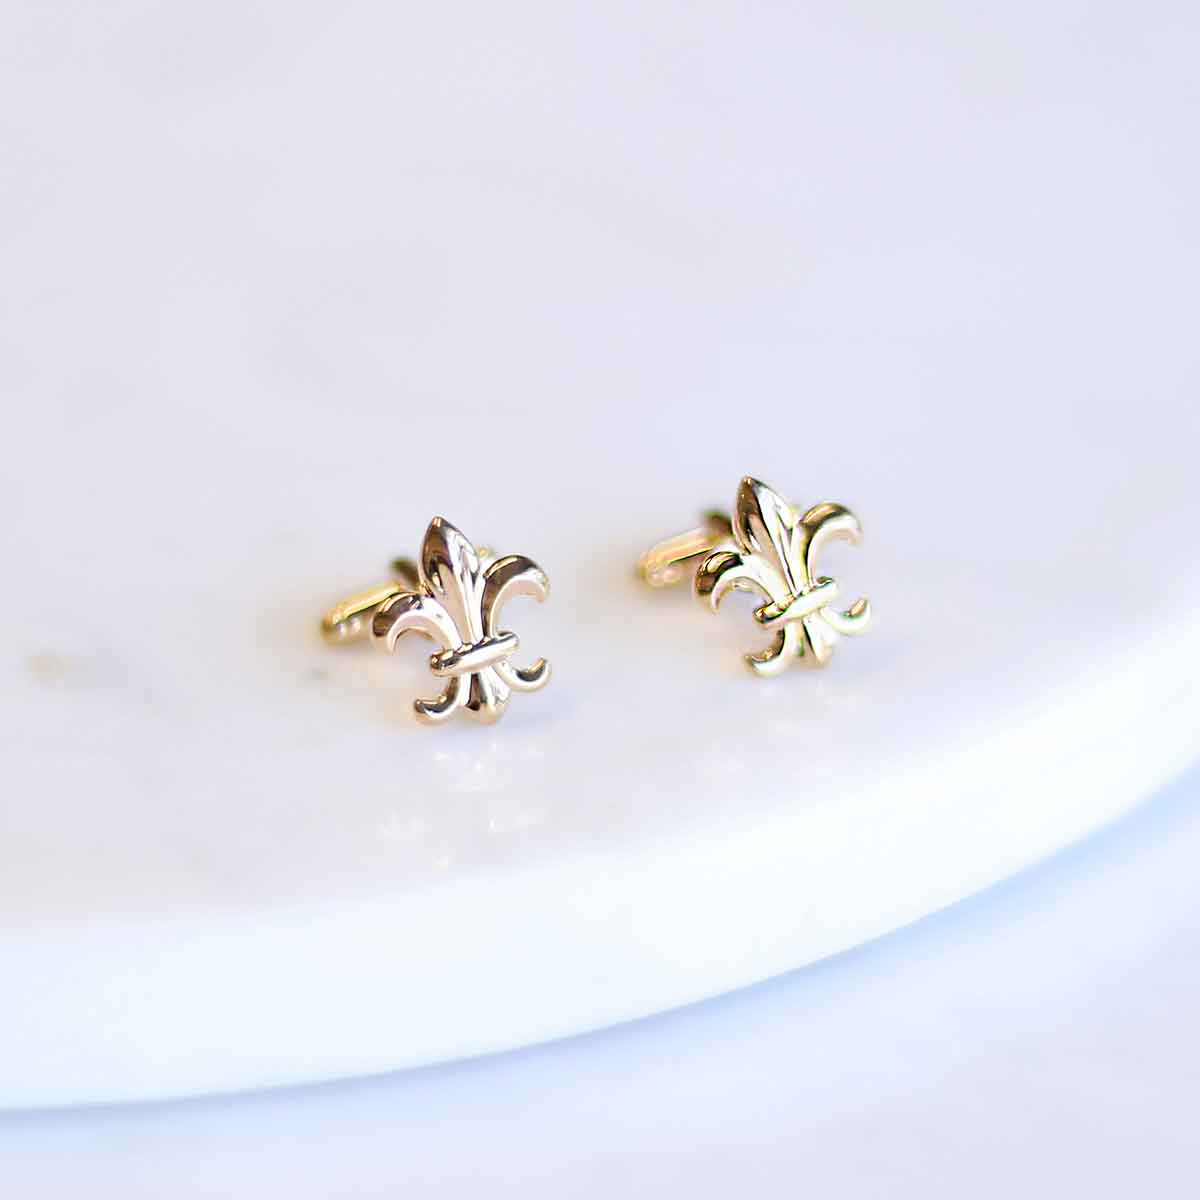 A pair of The Royal Standard Fleur De Lis Cufflinks in gold, measuring .5", on a white plate.